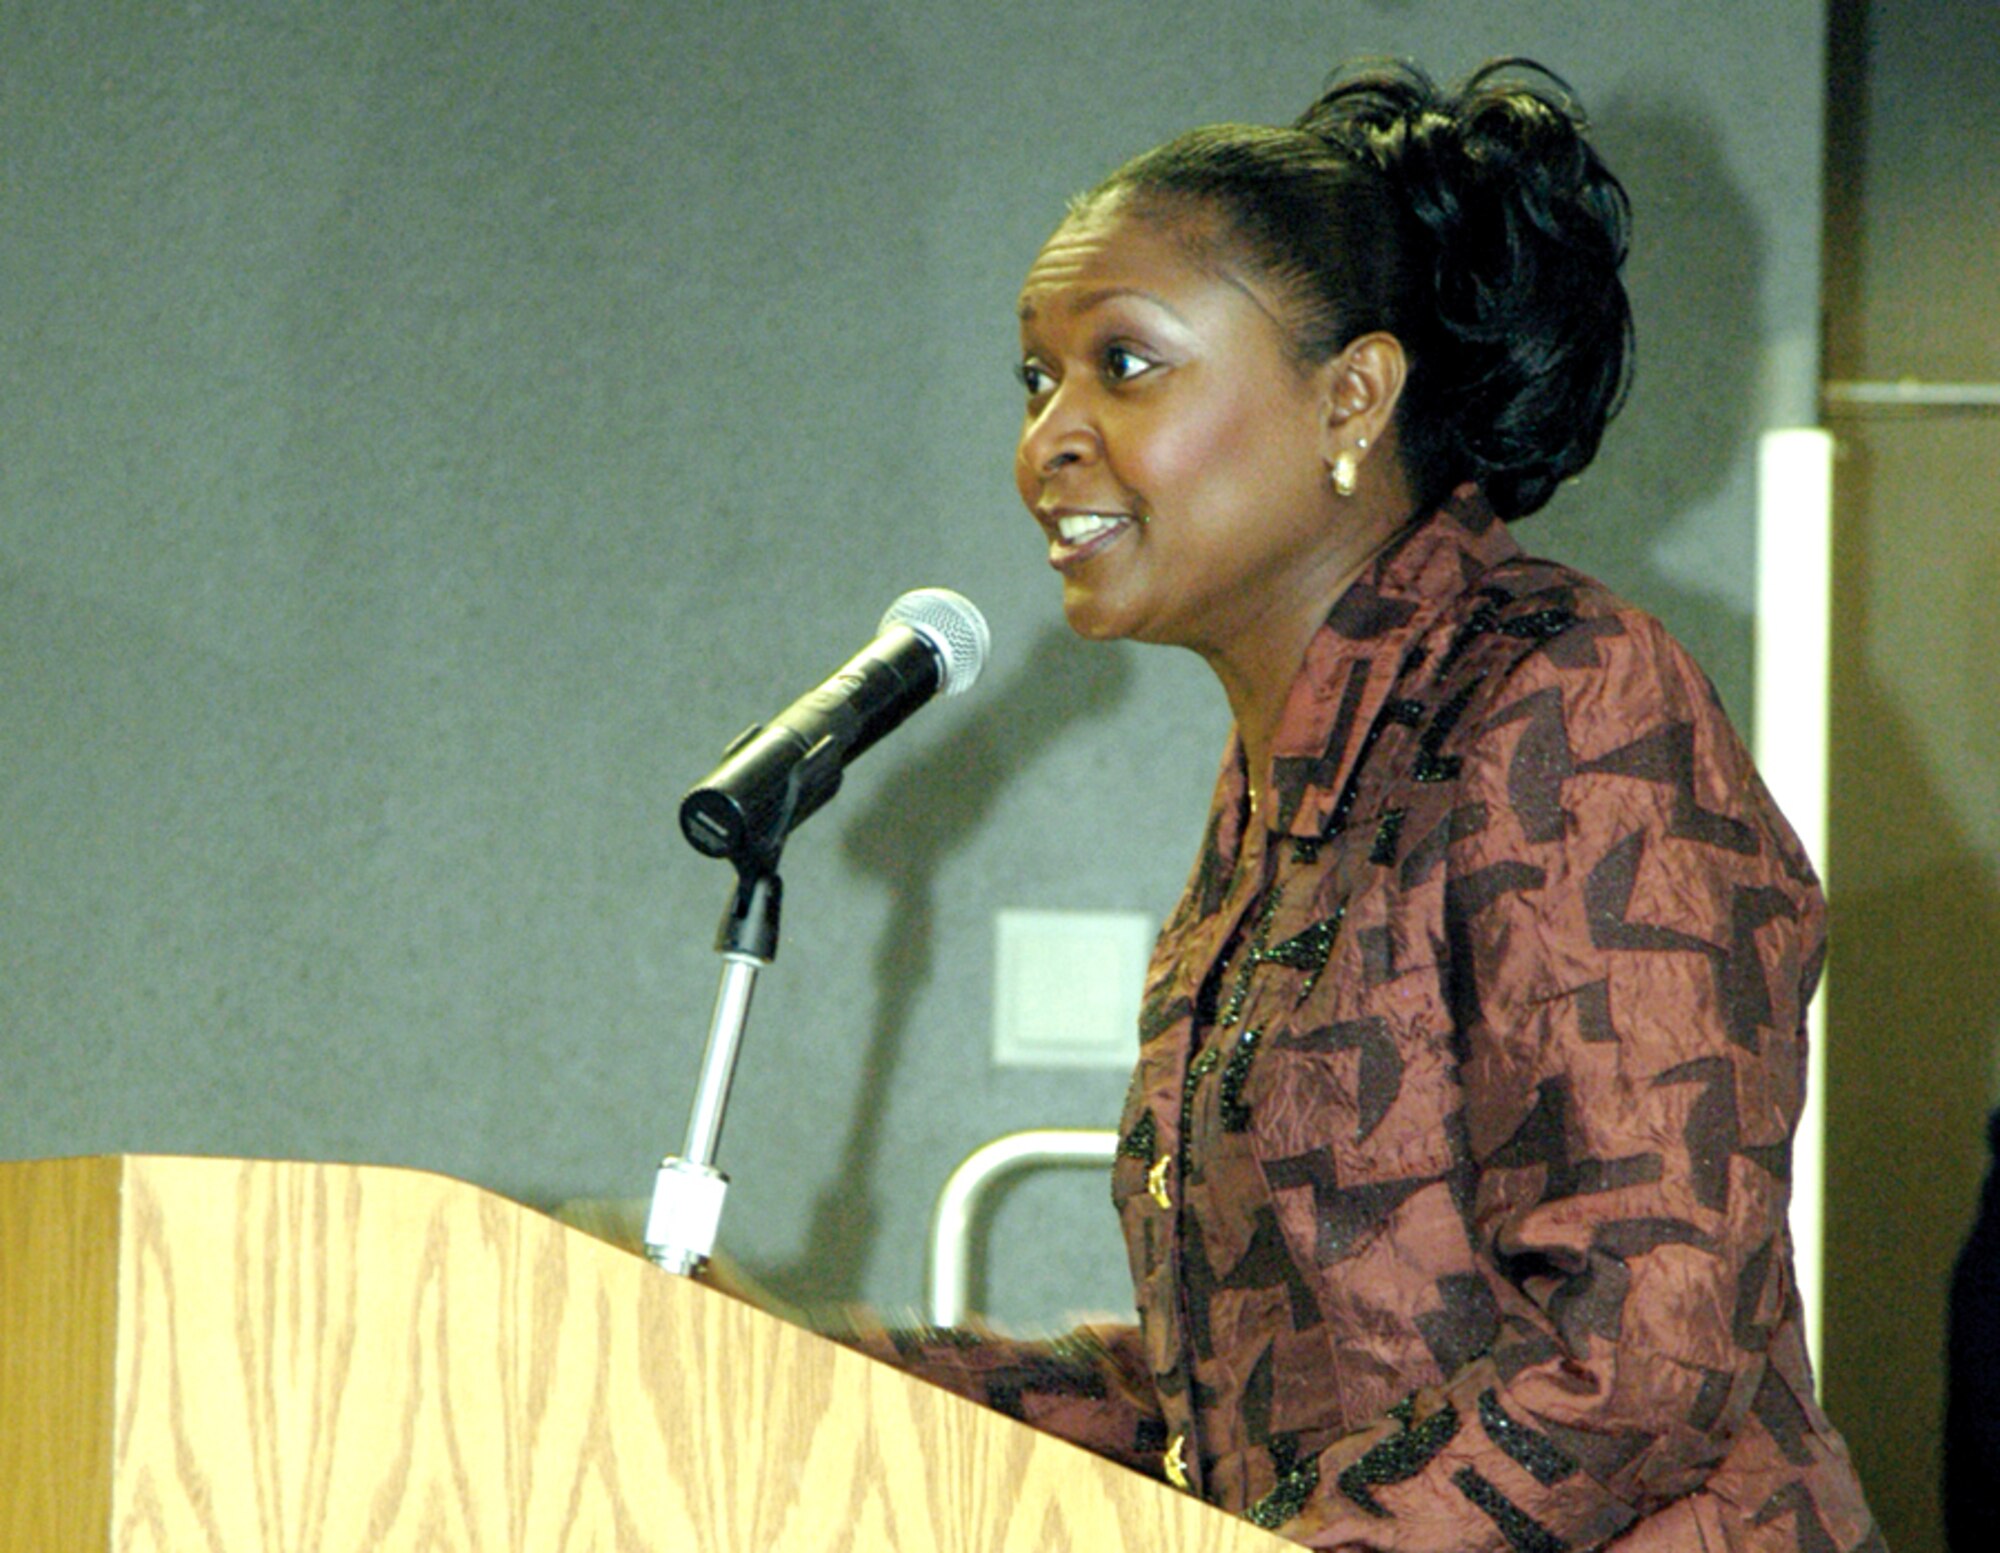 SCHRIEVER AIR FORCE BASE, Colo.(AFPN) -- Dr. Jacqueline Taggart speaks about community to an audience of about 150 people during the African-American History Month kickoff breakfast here Feb. 1. Dr. Taggart is a business professor at a community college in Colorado Springs.  (U.S. Air Force photo by Staff Sgt. Don Branum)